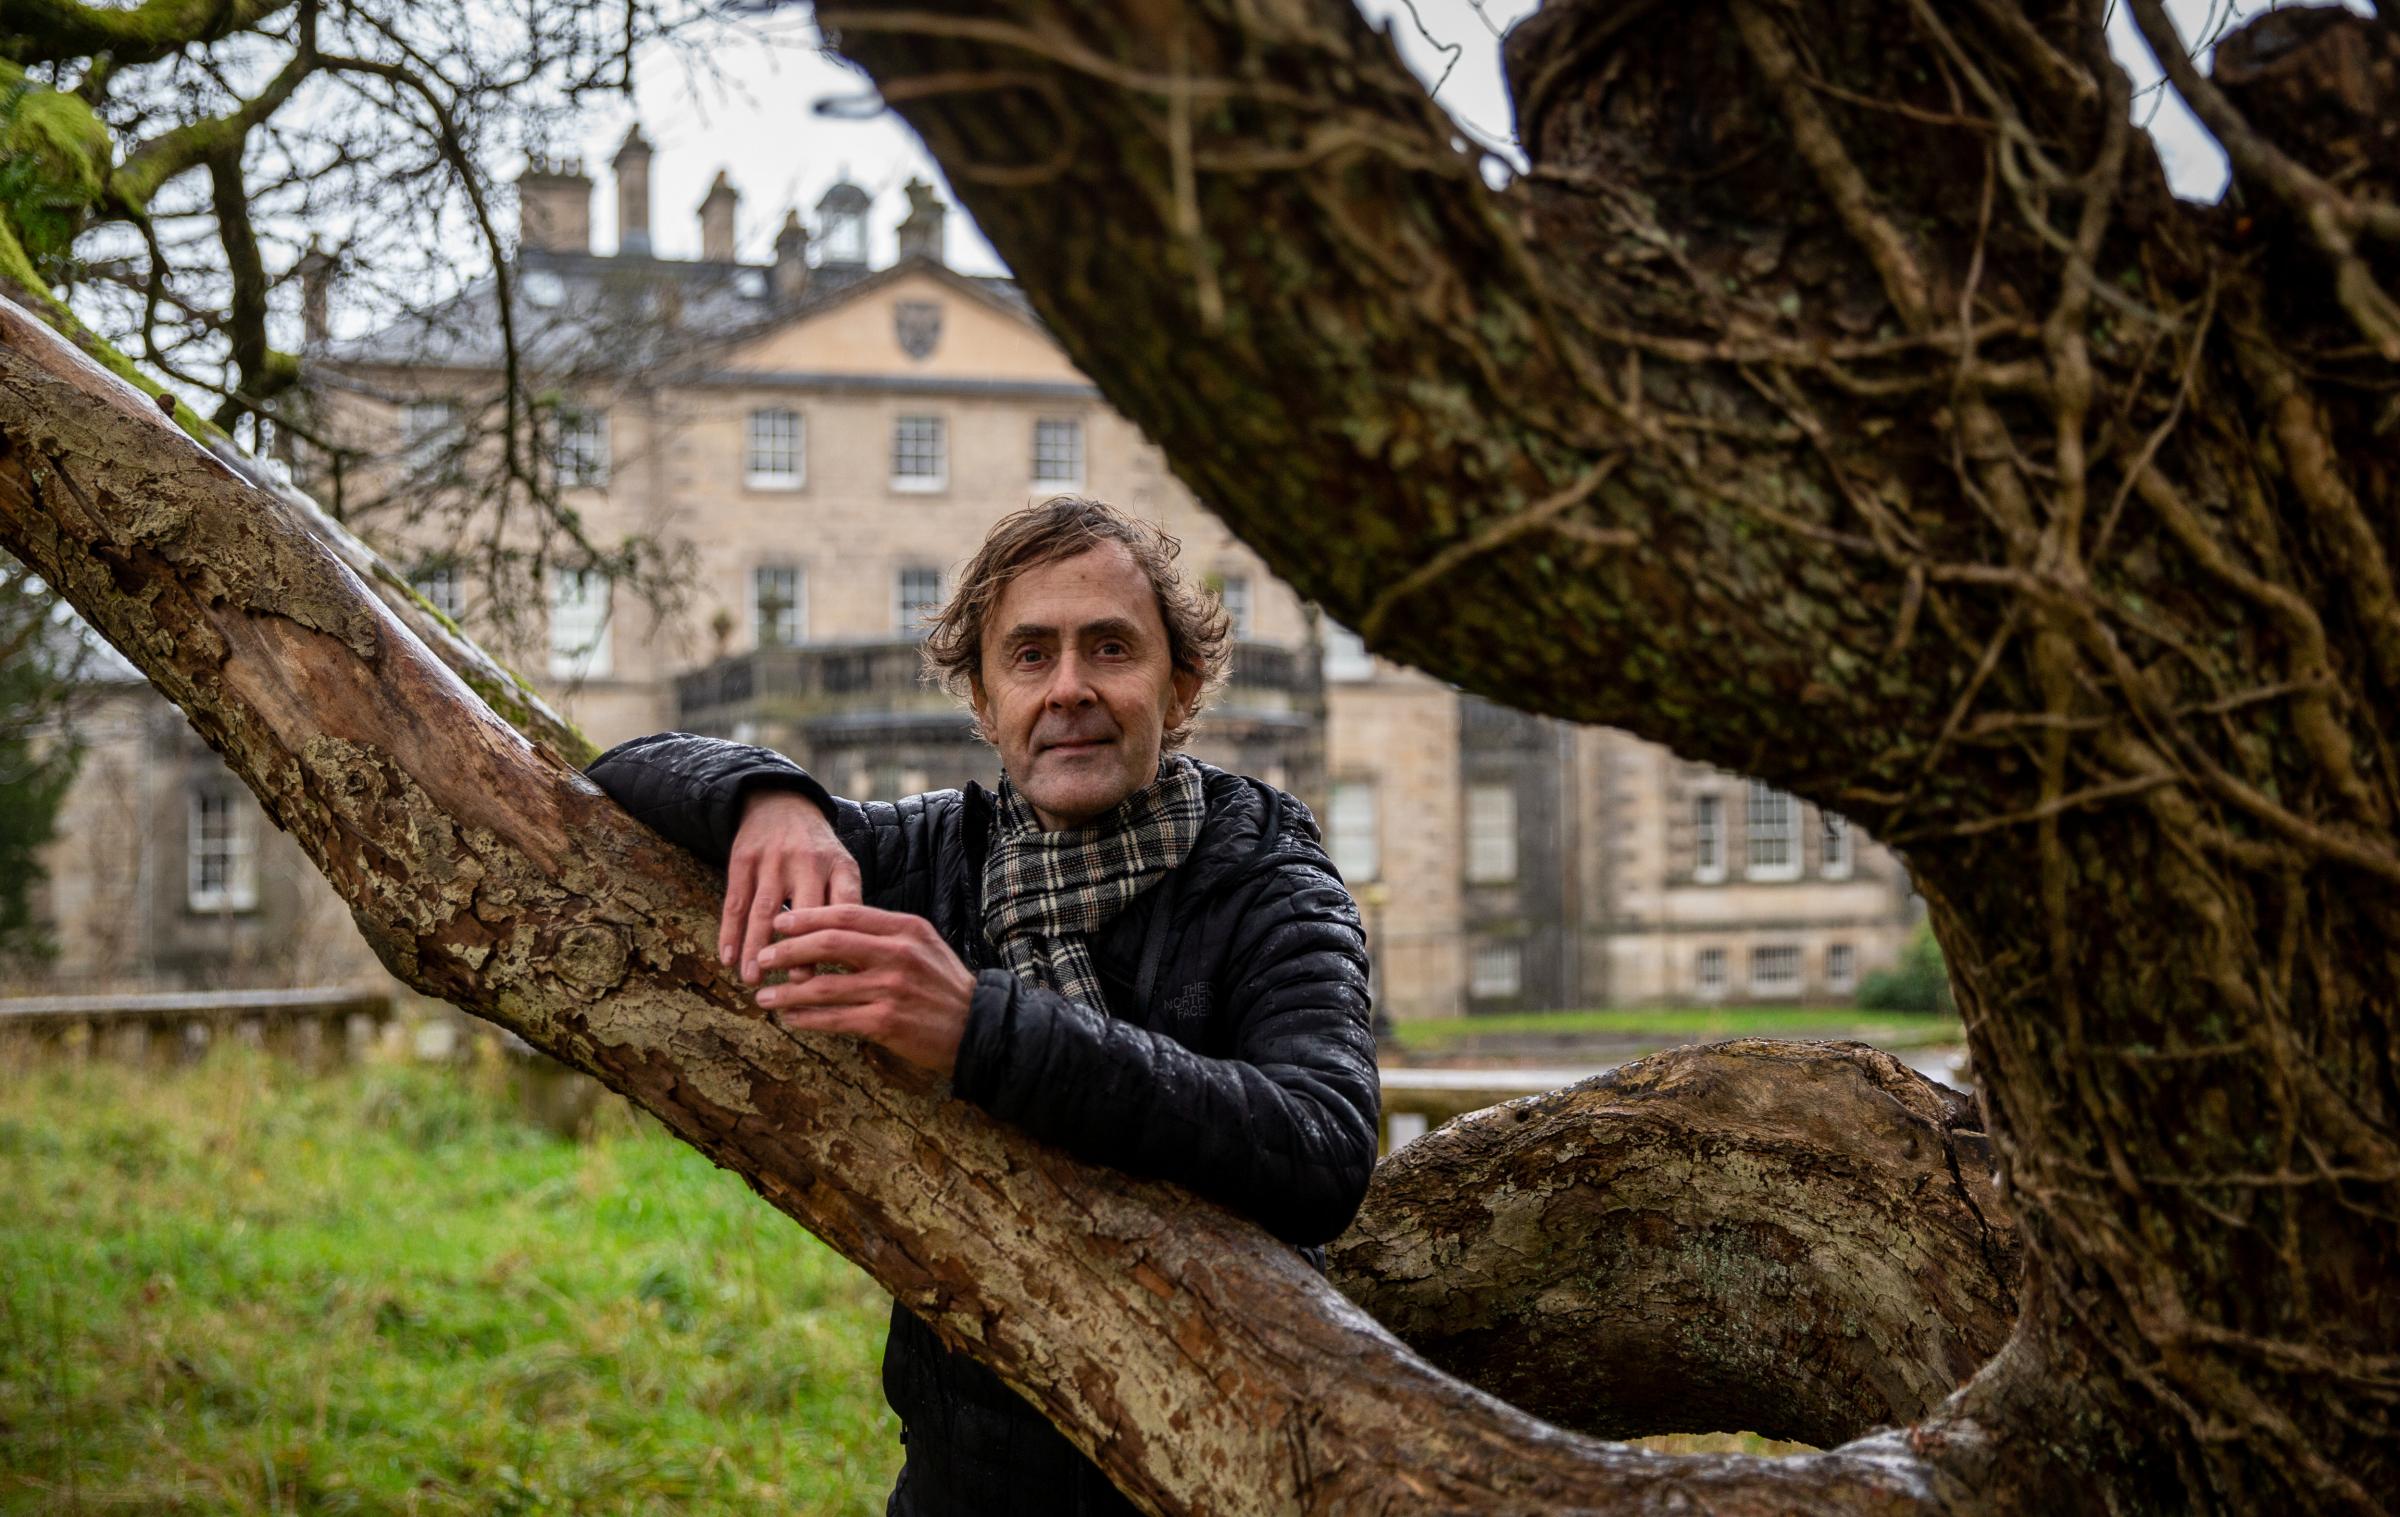 Artist Alec Finlay pictured in front of Pollok House at Pollok Country Park, Glasgow. Photograph by Colin Mearns.